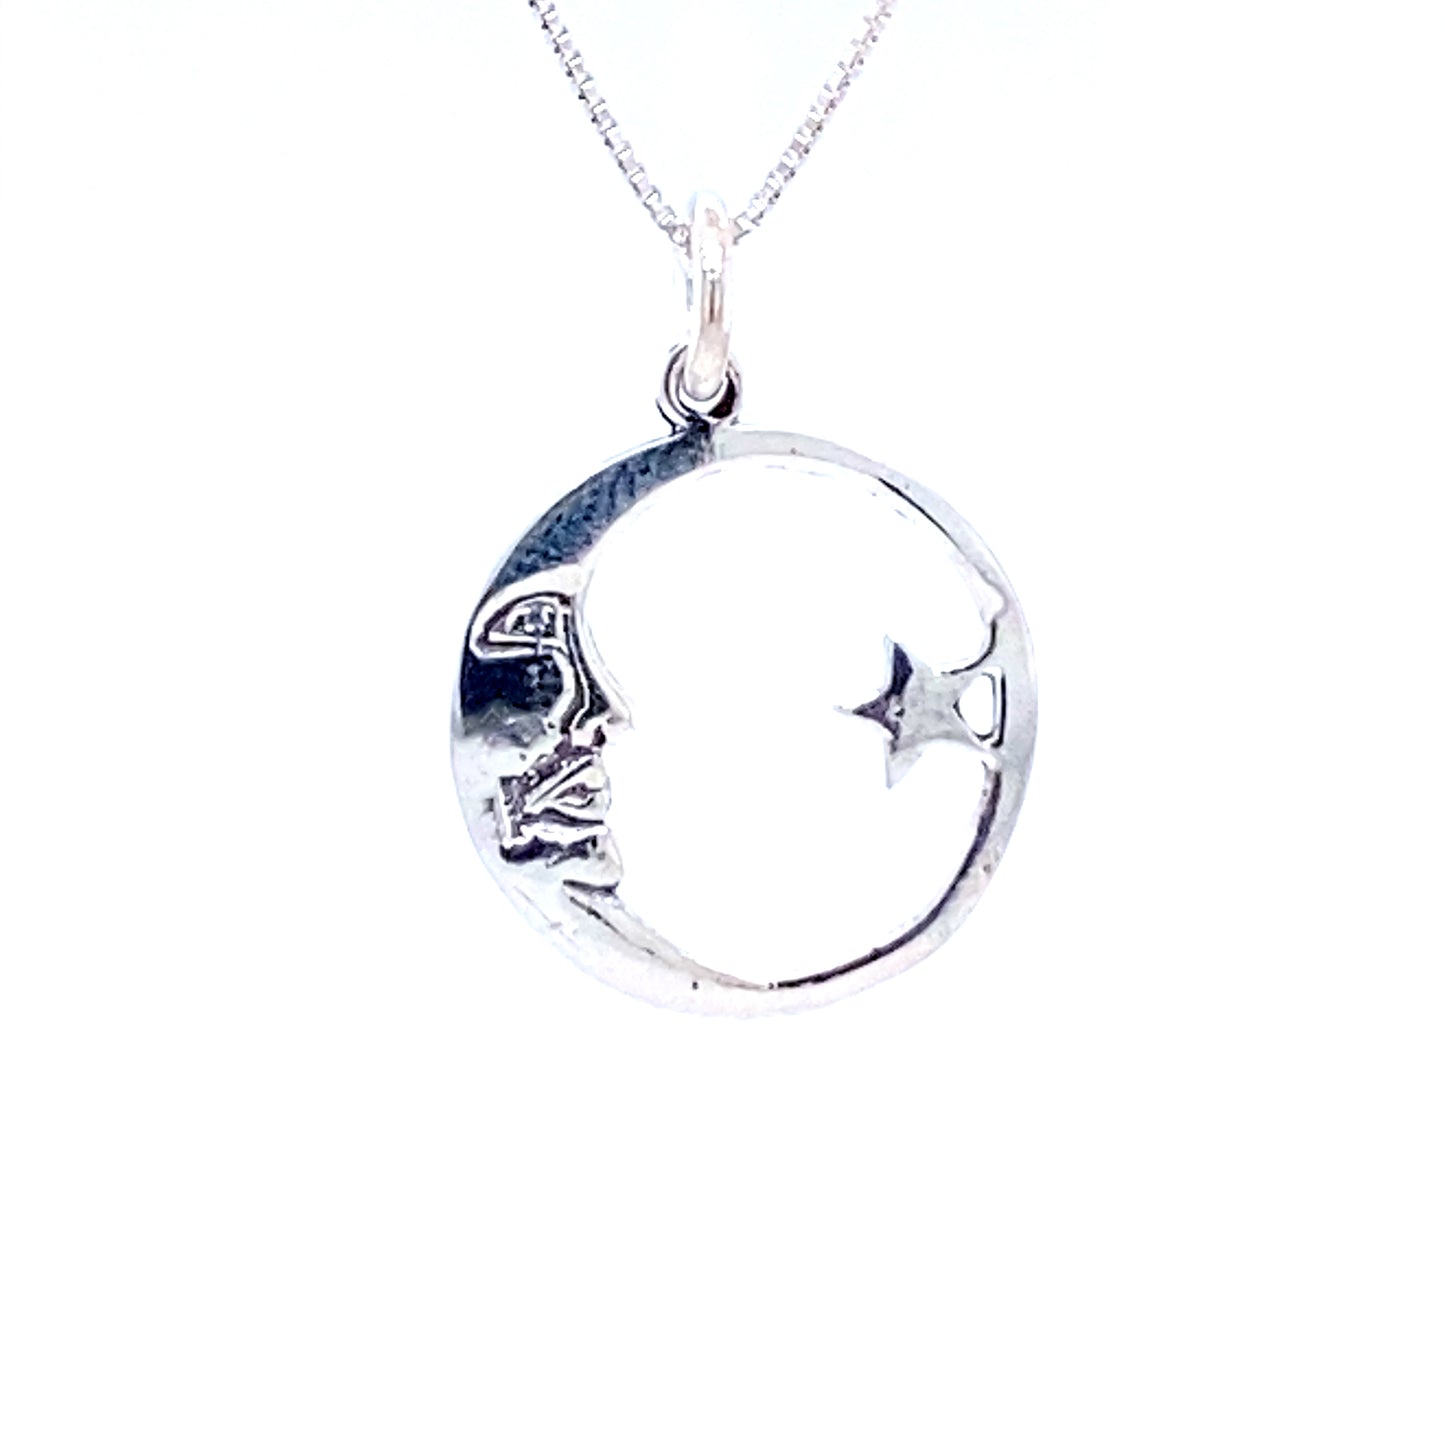 A Super Silver interstellar pendant featuring celestial styles with a Crescent and Star Pendant motif.